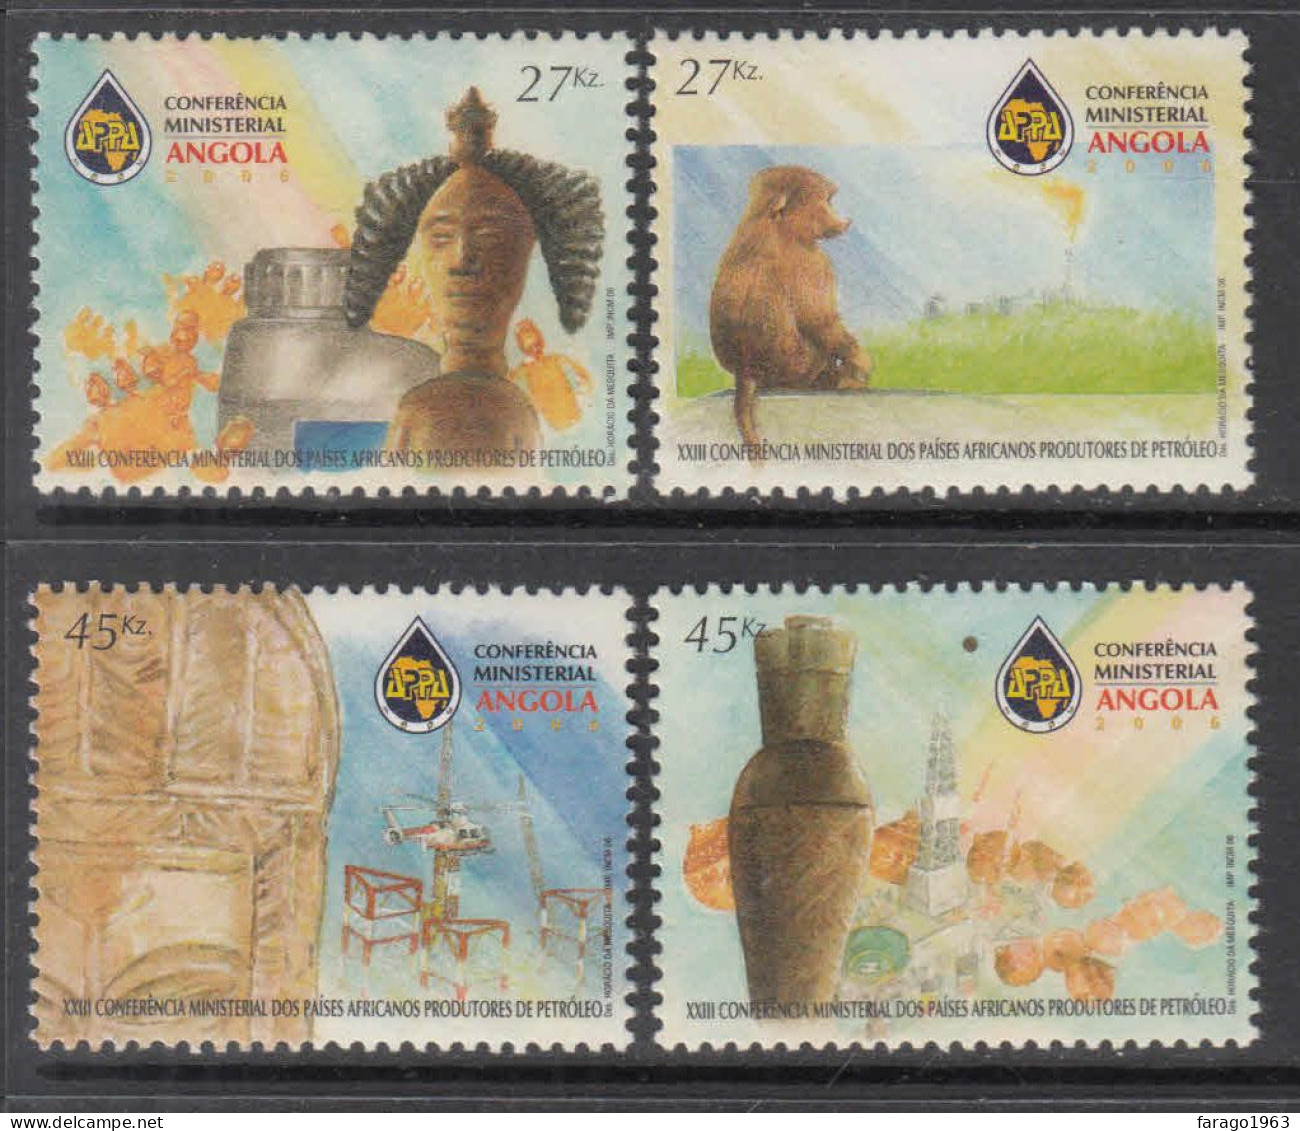 2006 Angola African Oil Petroleum Conference Helicopters Complete Set Of 4 MNH **DIFFICULT** - Angola